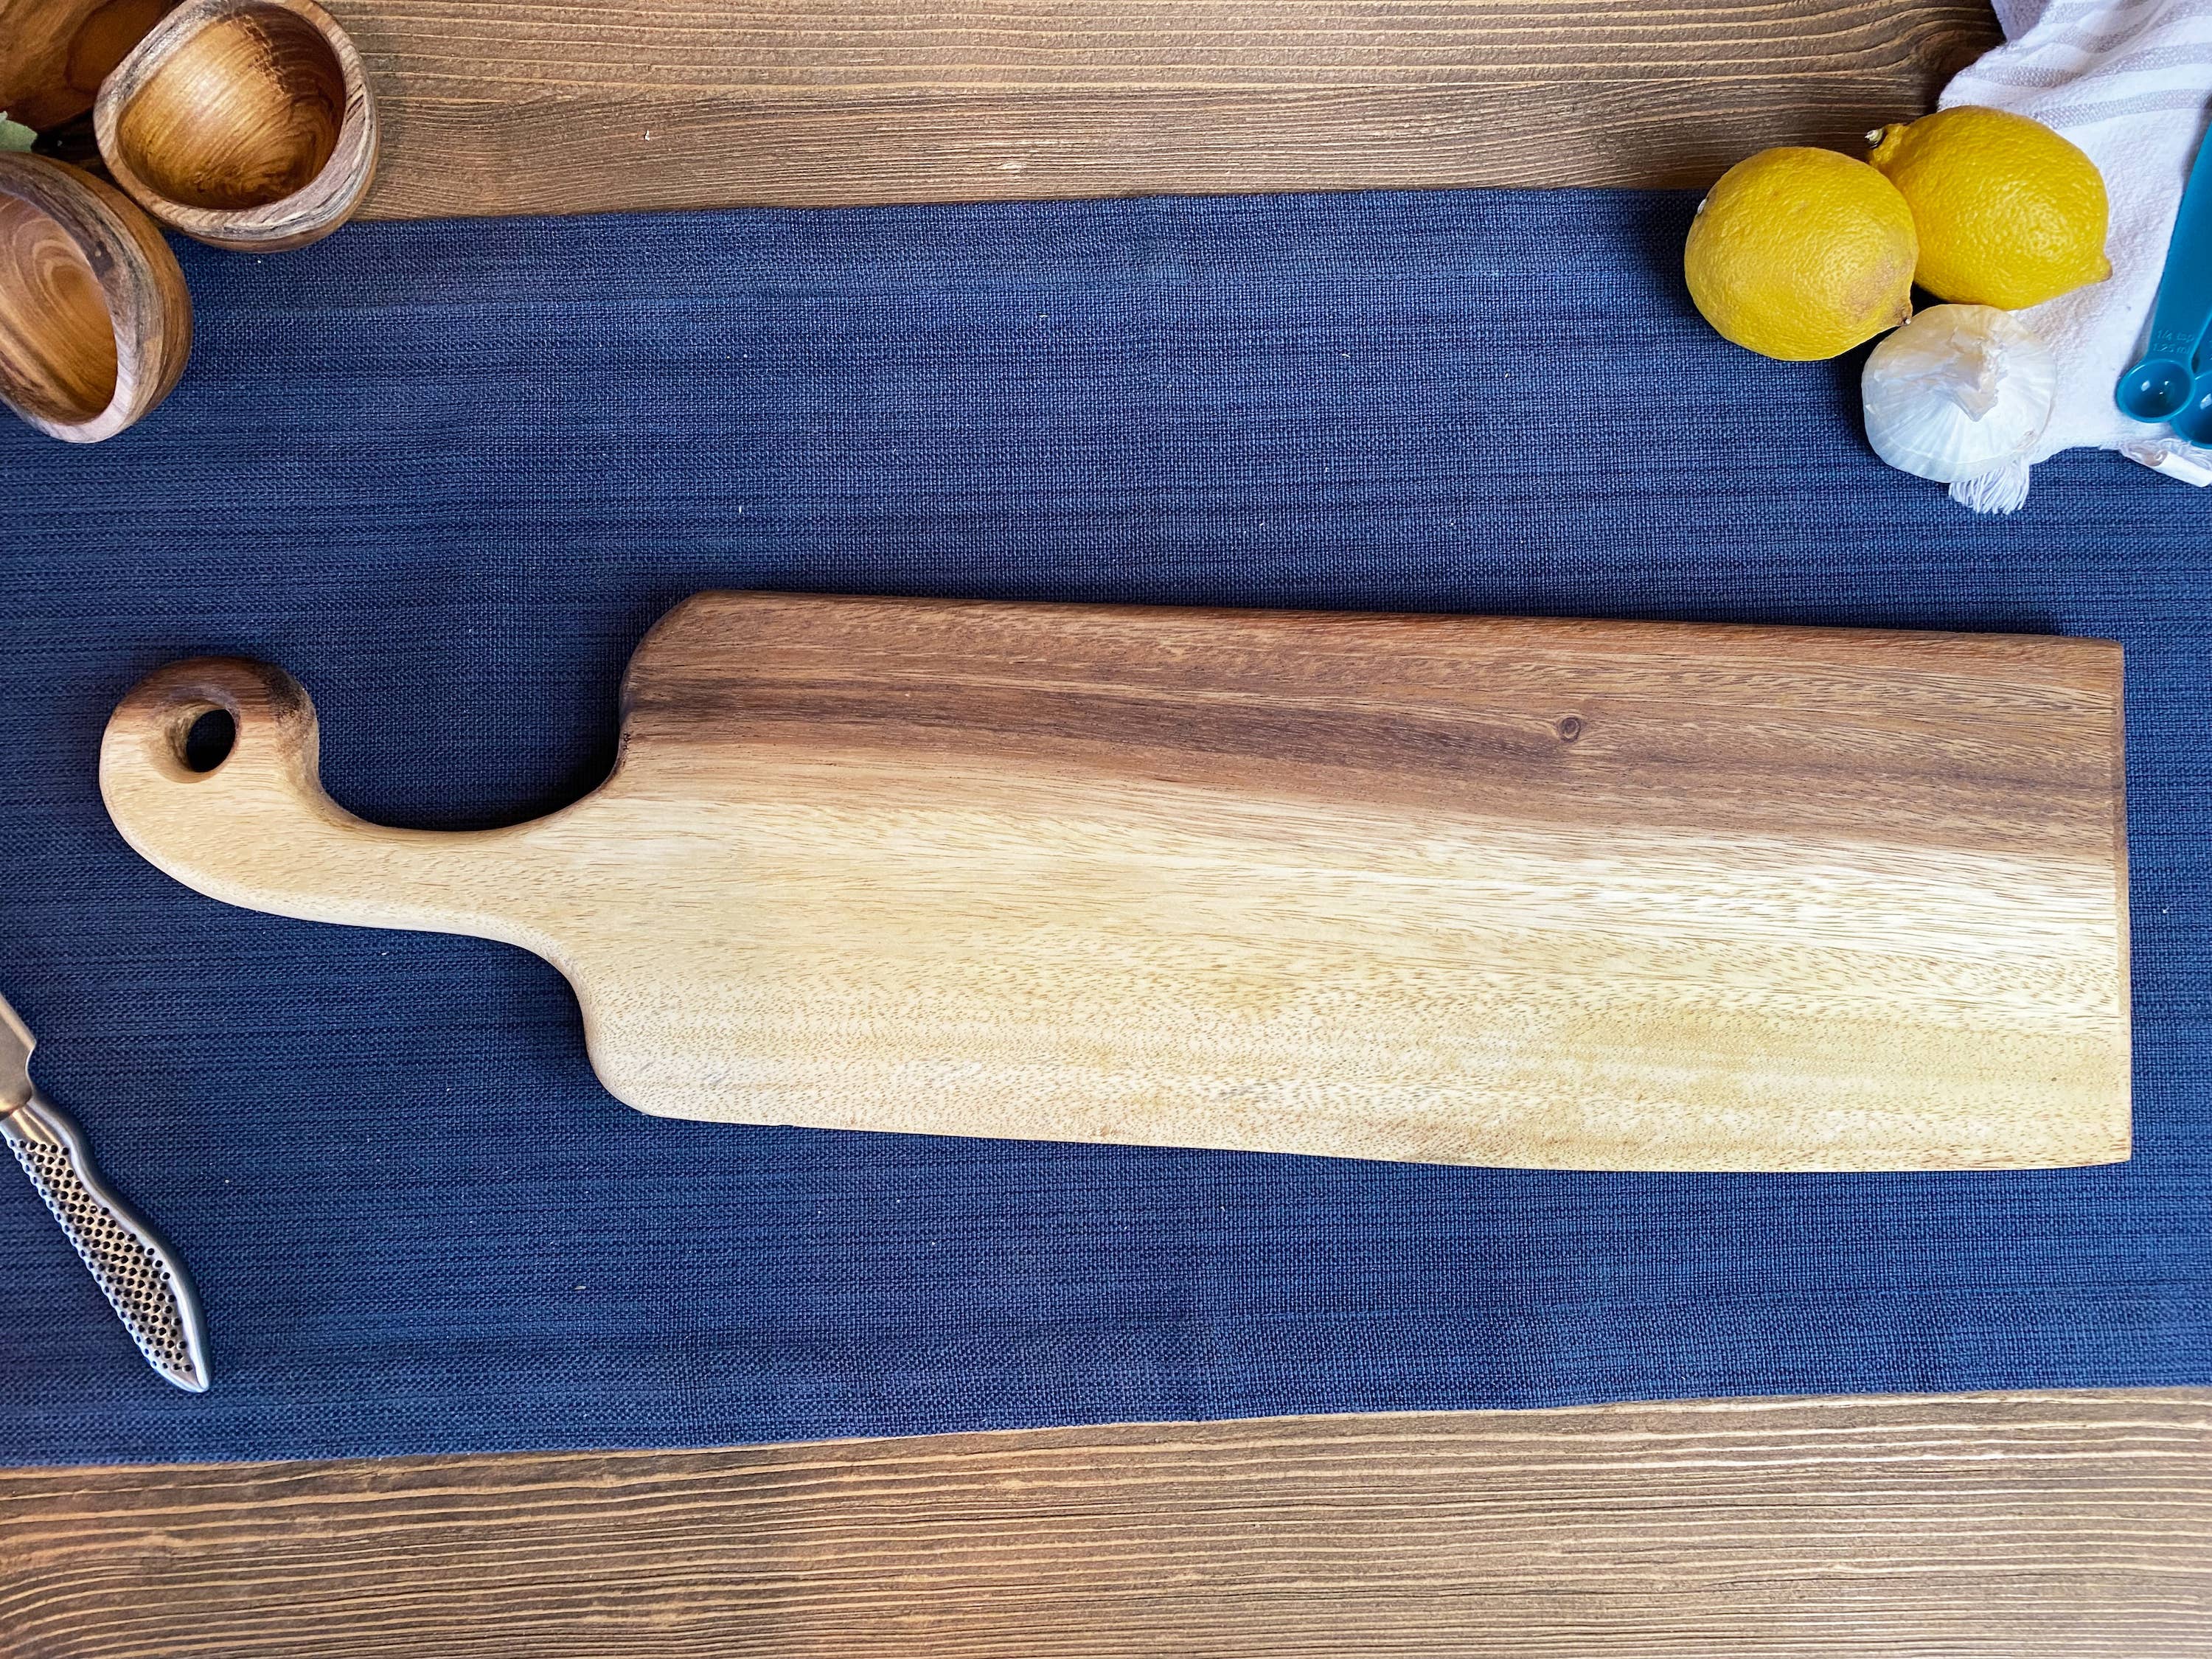 22" x 6" x 1" Live Edge Bread/Appetizer Board with Handle